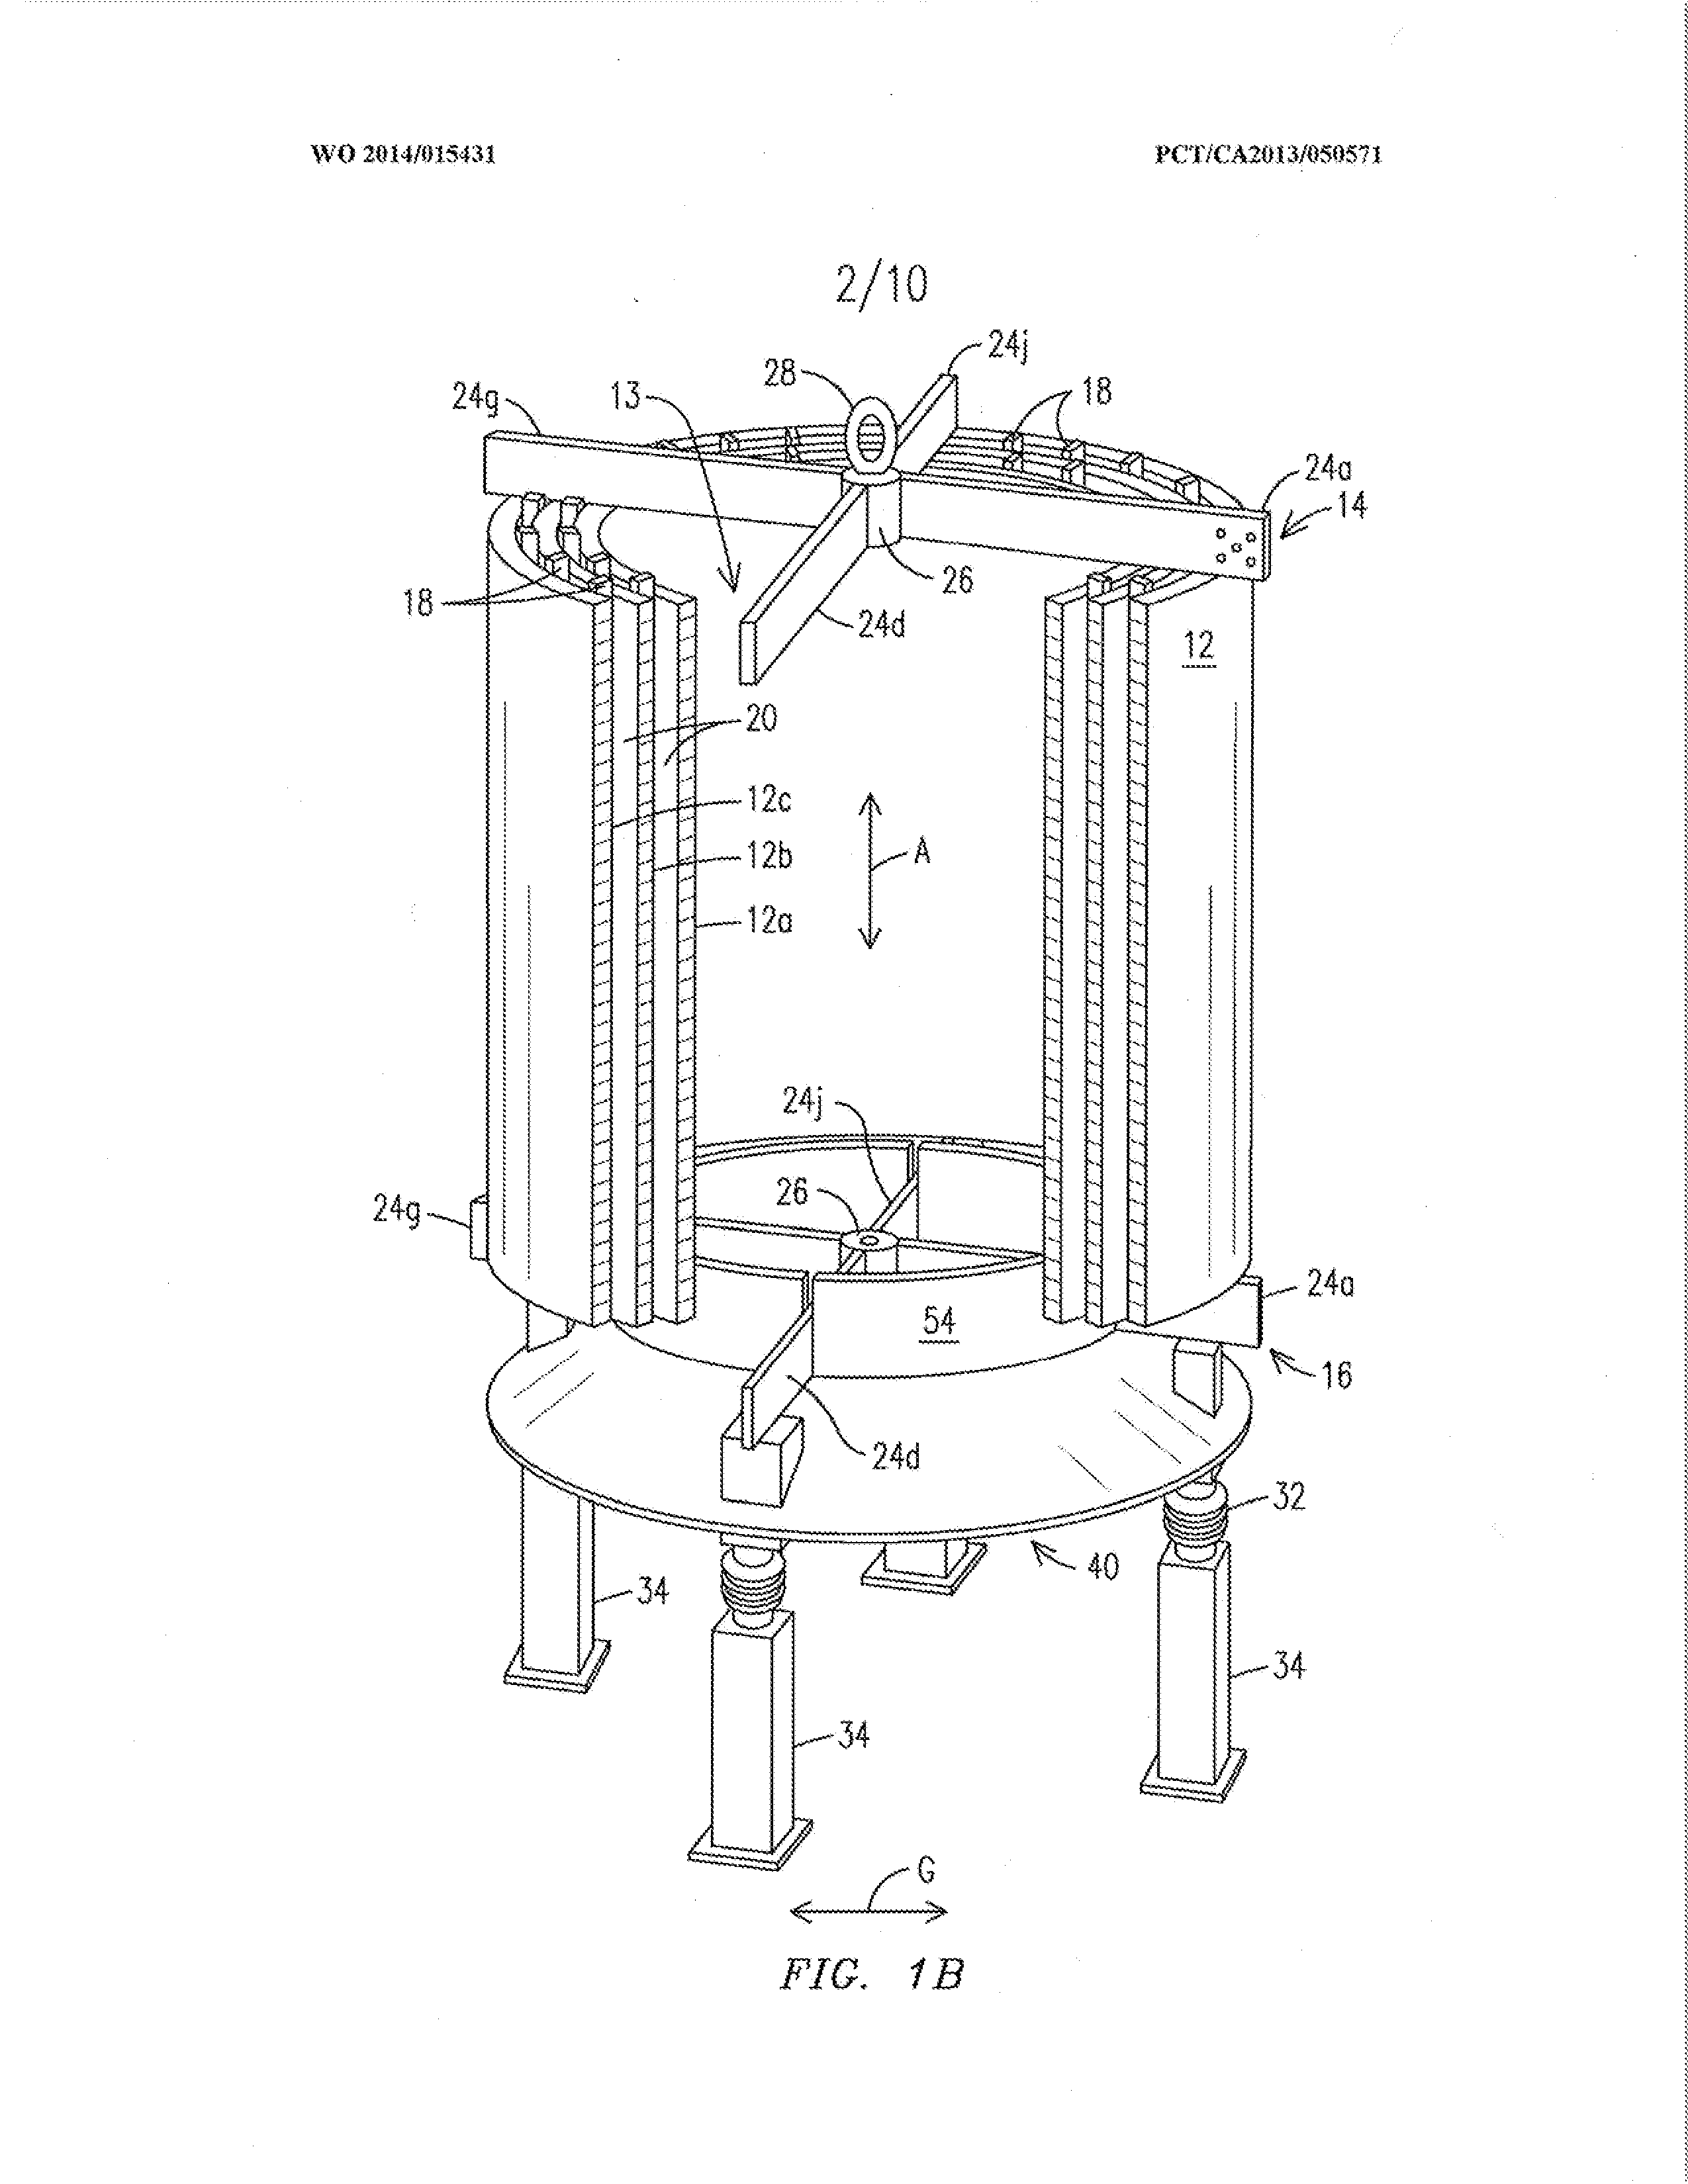 Apparatus and method for mitigating thermal excursions in air core reactors due to wind effects